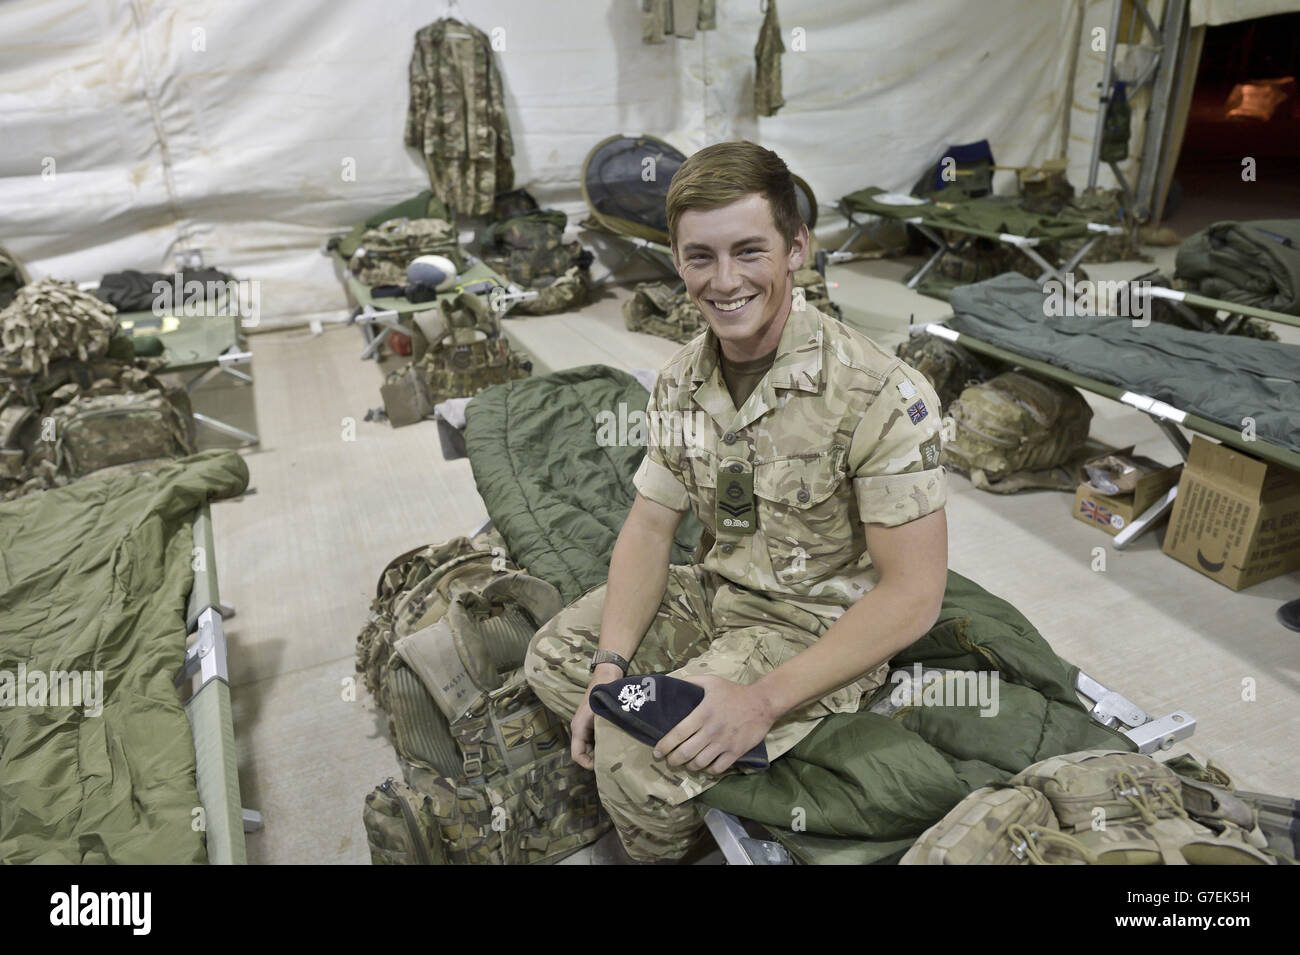 Corporal Thomas Warner 23, from Port Talbot of 1st The Queen's Dragoon Guards, sits inside temporary tented accommodation at Camp Bastion, as troops prepare to withdraw from the camp in Helmand Province, Afghanistan and return to the UK. Stock Photo